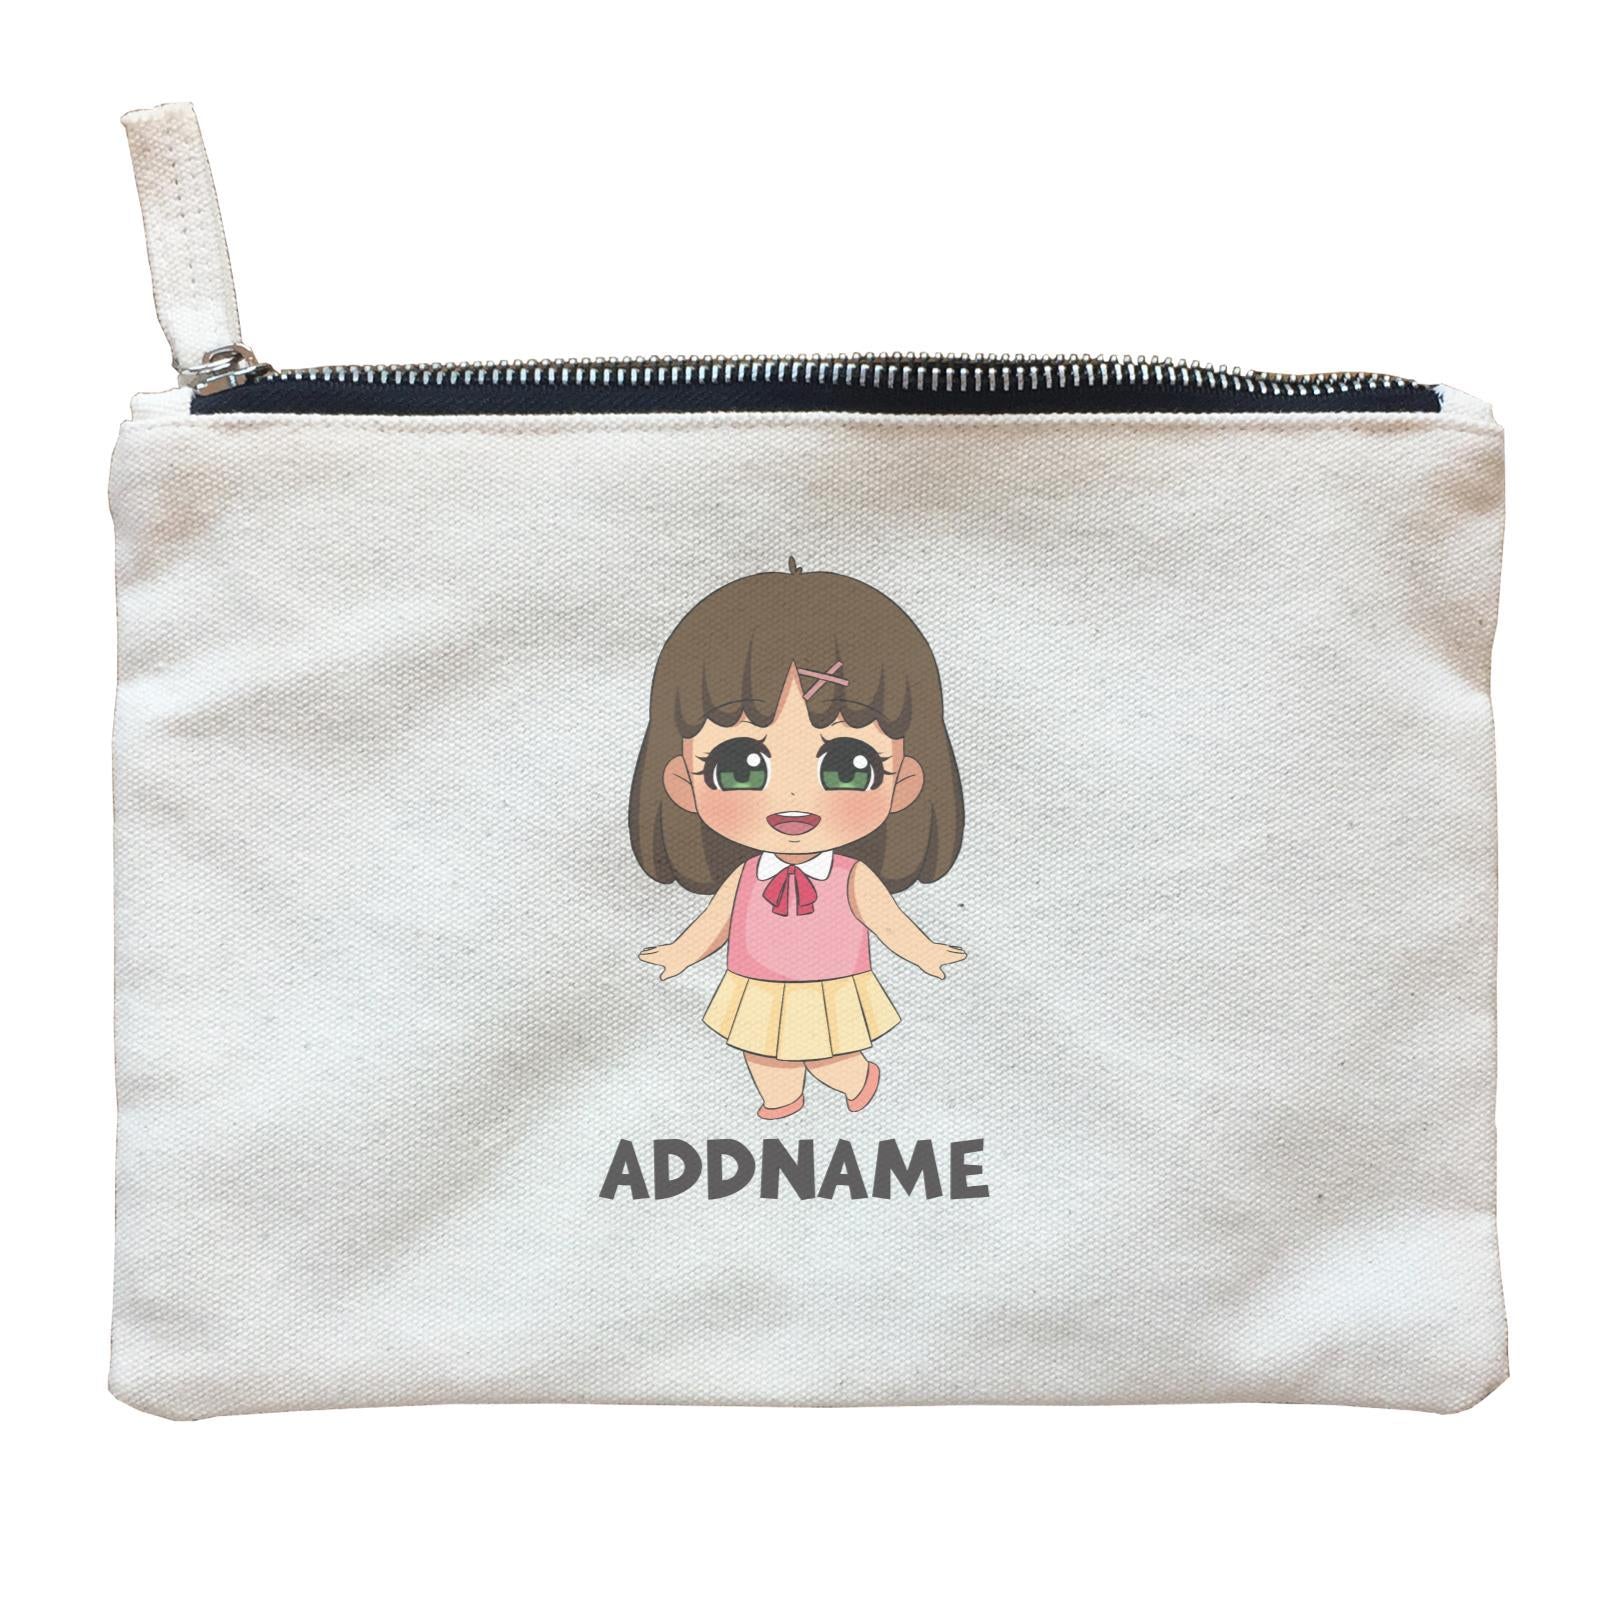 Children's Day Gift Series Little Chinese Girl Addname  Zipper Pouch